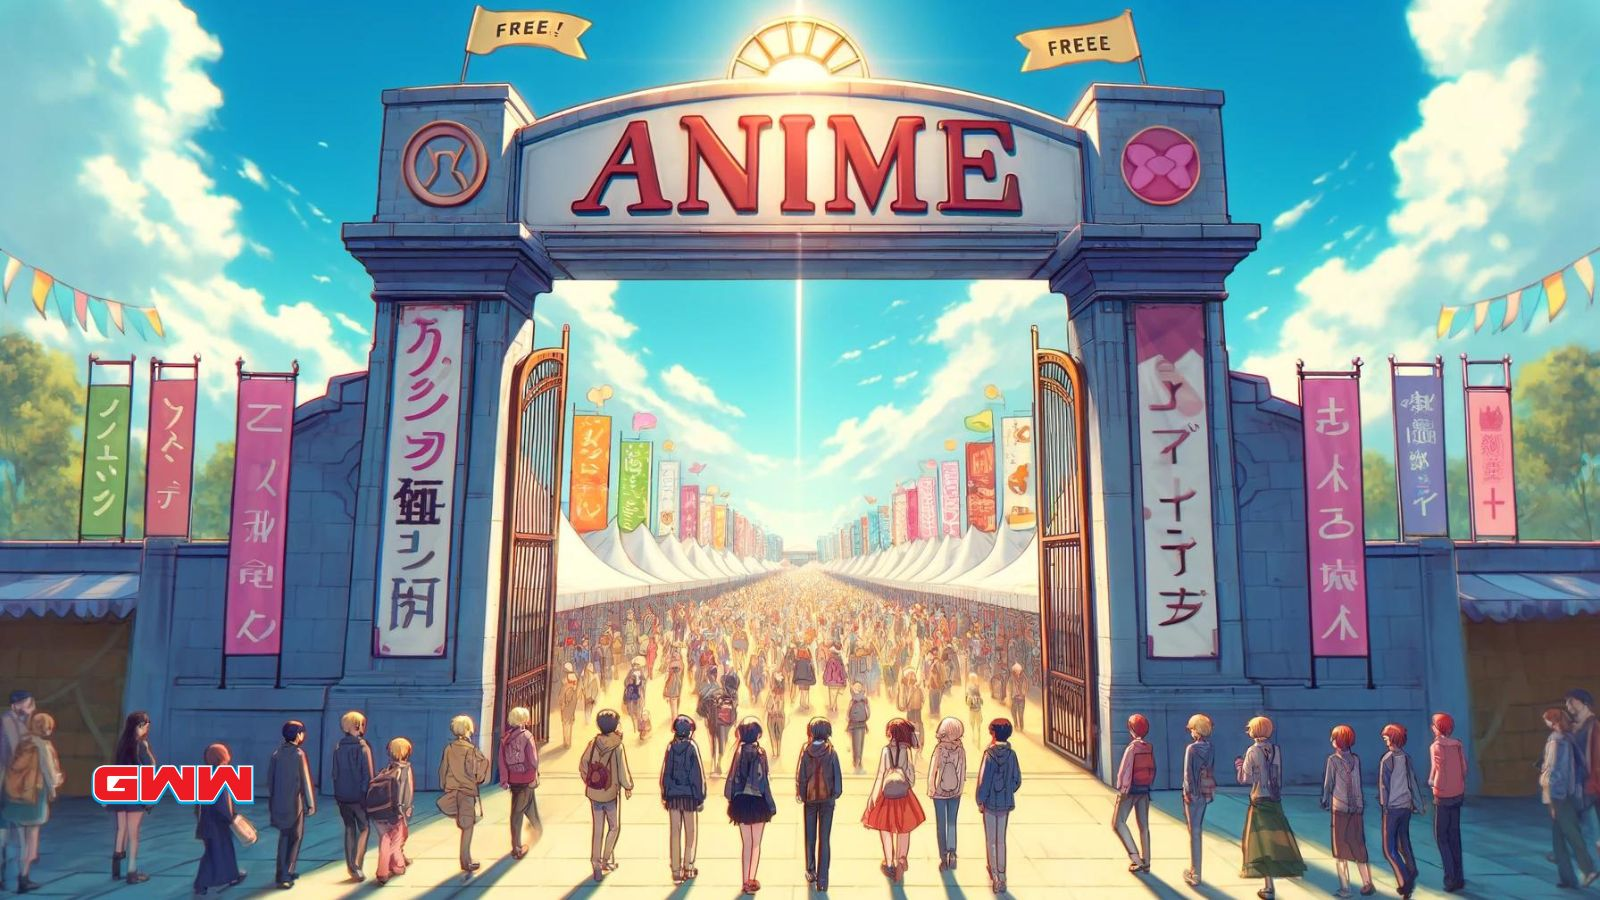 Anime festival entrance with "FREE" signs and visitors